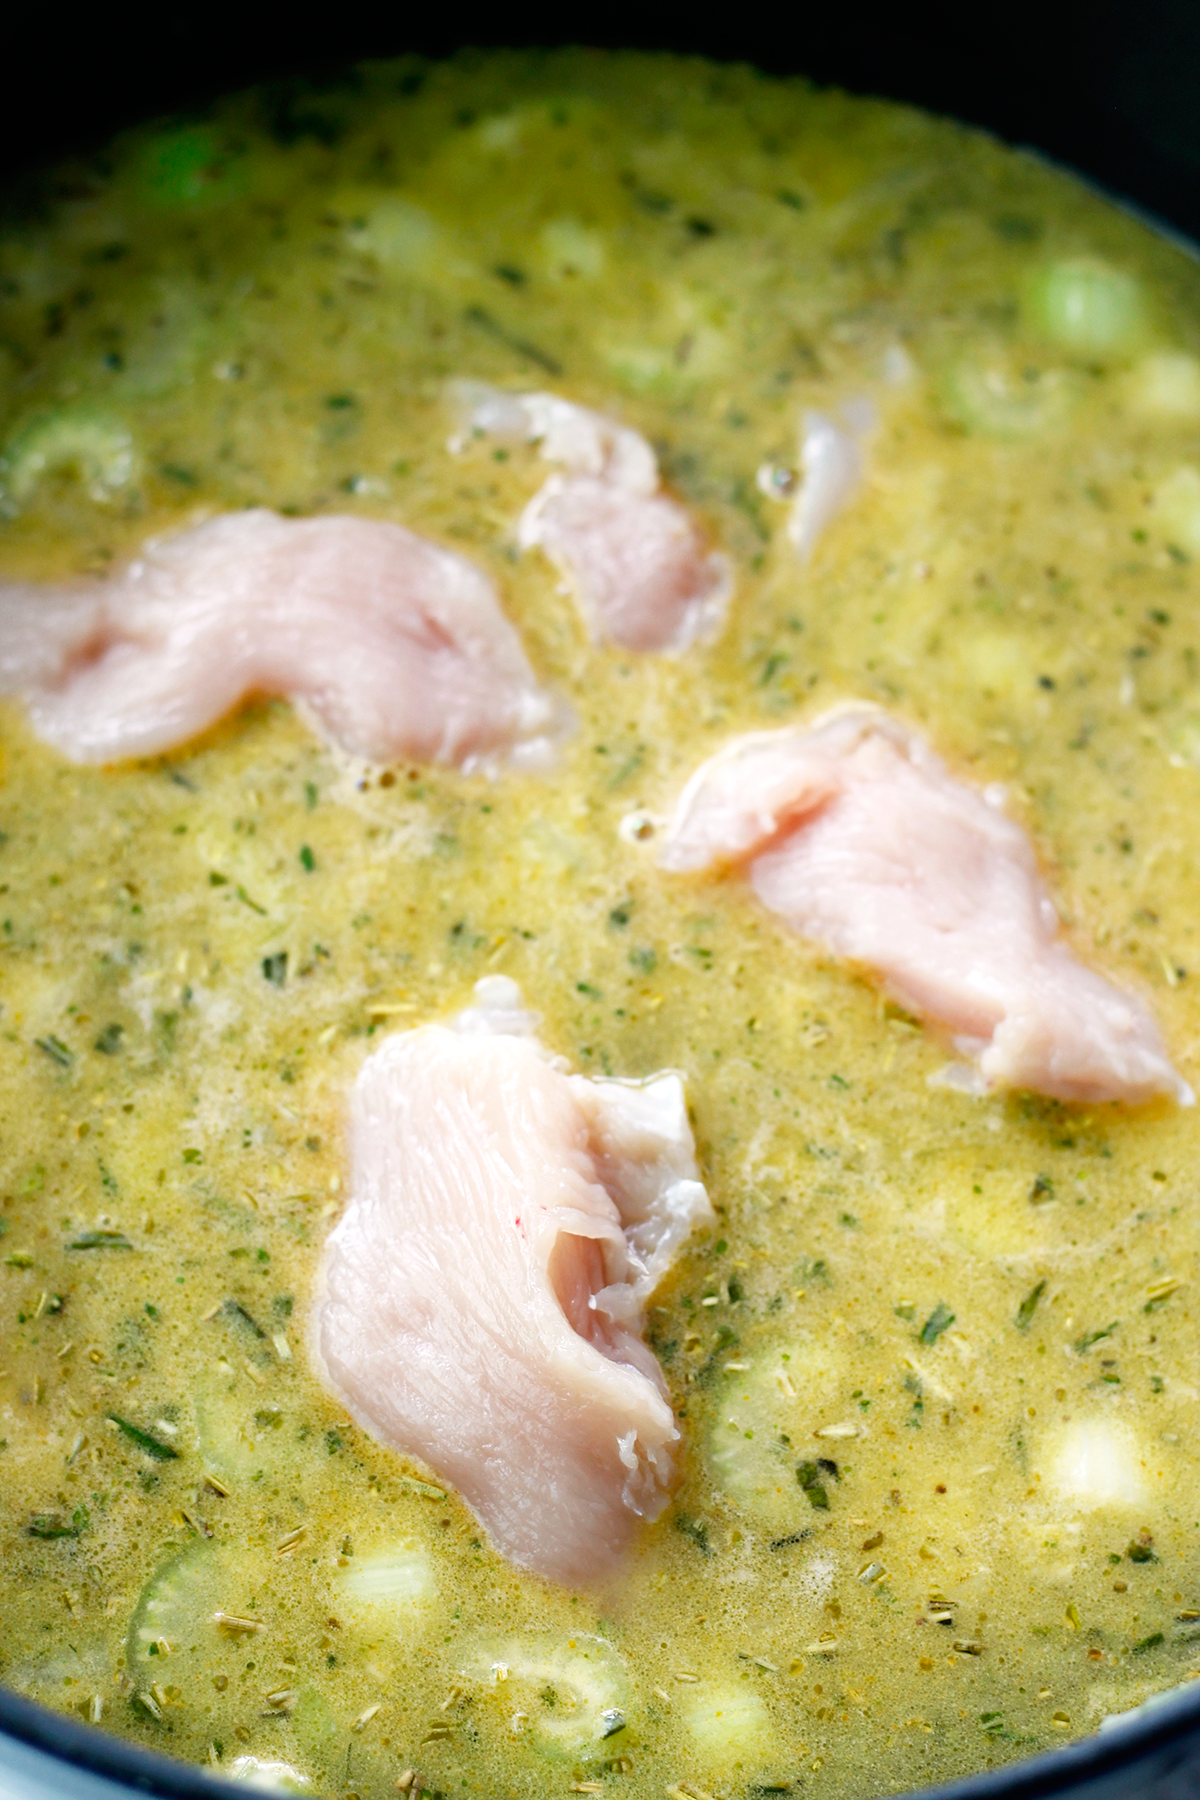 Raw chicken pieces being added to soup.